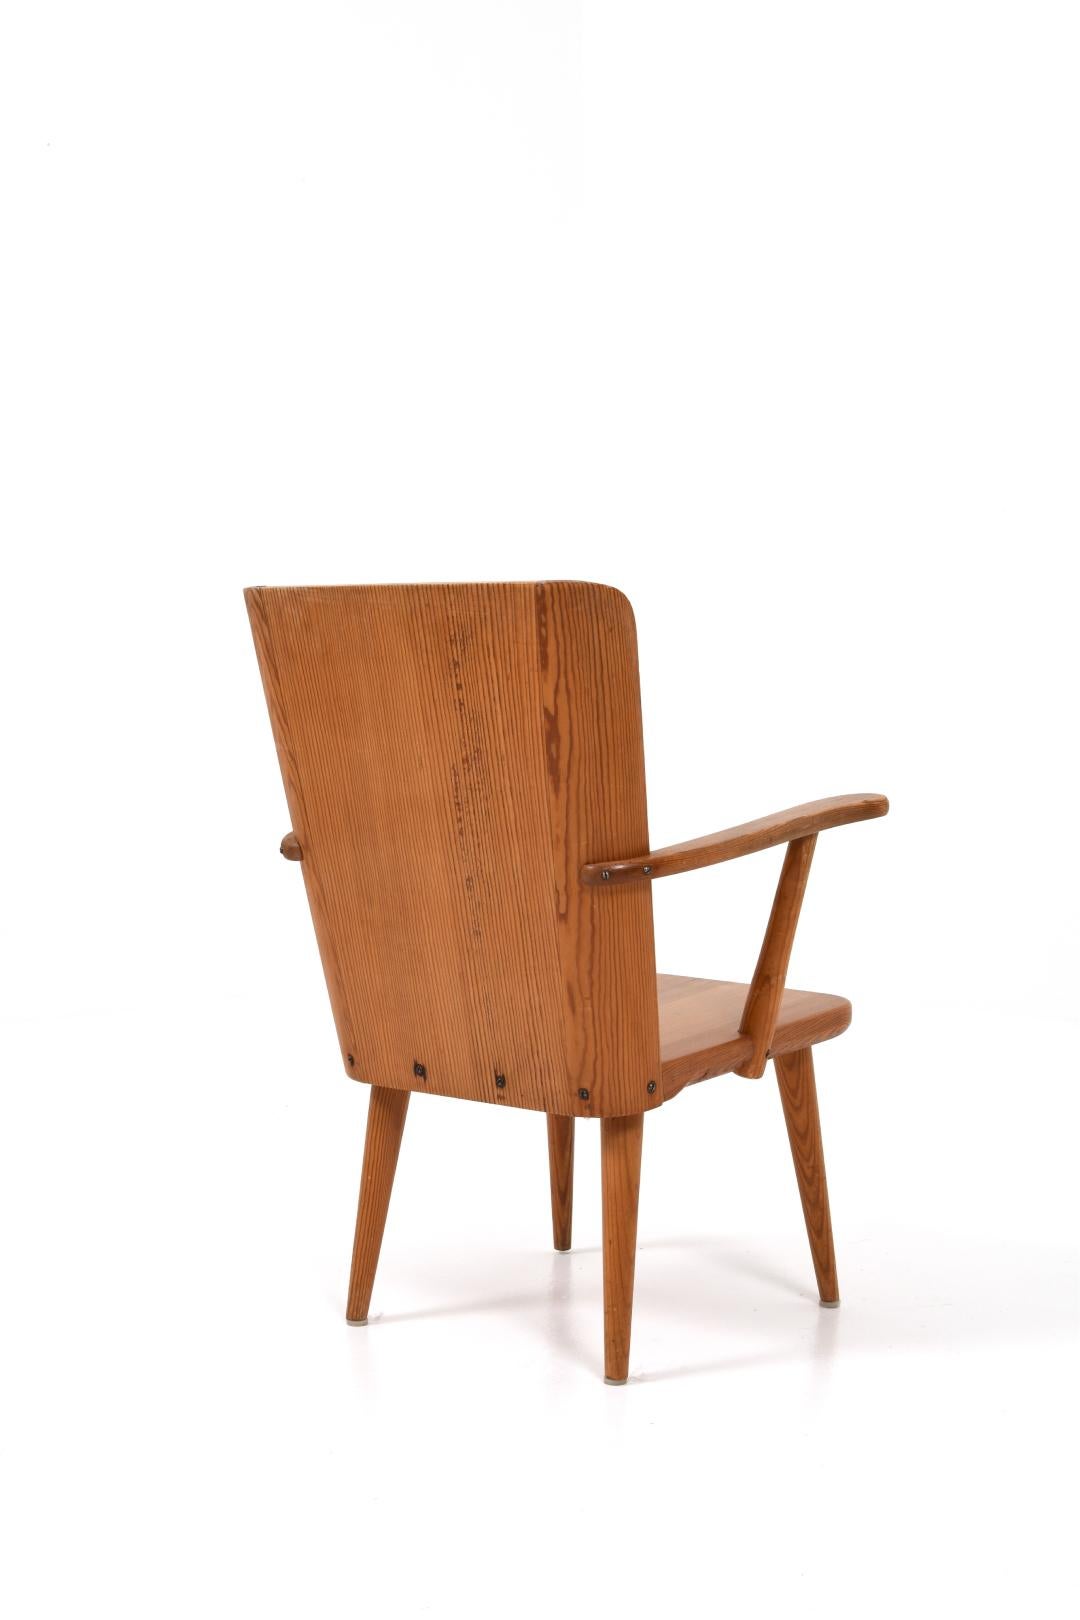 Rare Swedish Armchair in Pine by Goran Malmvall for Svensk Fur. Designed in 1940s.